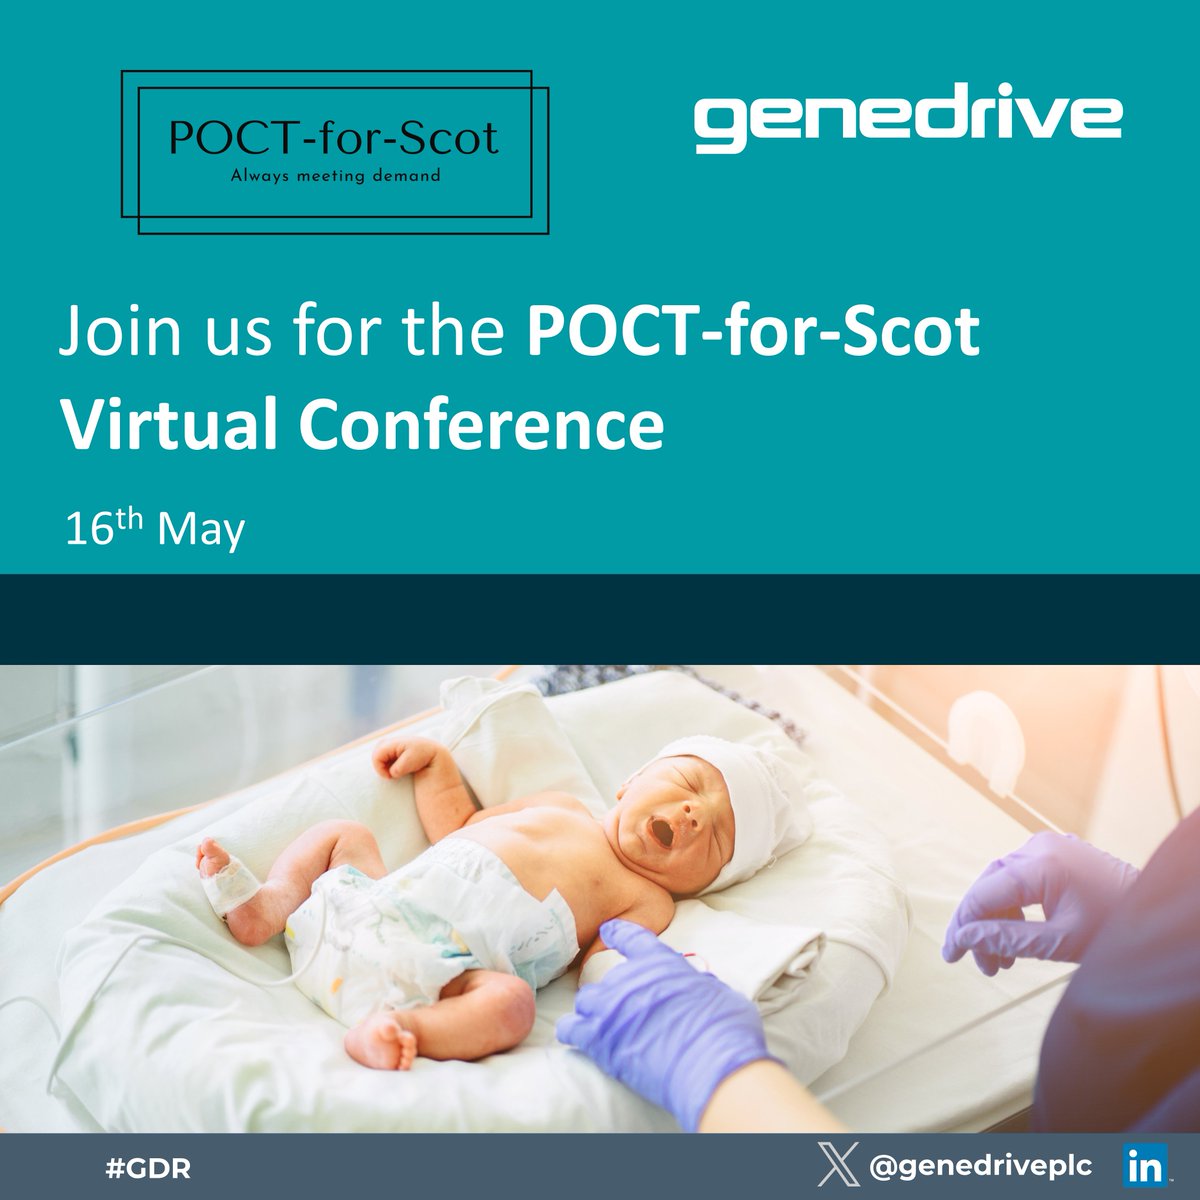 Join us online TOMORROW for the POCT-for-Scot virtual conference!

Professor Bill Newman will be speaking on the Genedrive MT-RNR1 ID Kit at 1:30pm.

See you tomorrow!
#GDR #POCT #pointofcare #POCTforScot #diagnostics #neonatal #diagnostics #pharmacogenomics #antibioticresistance